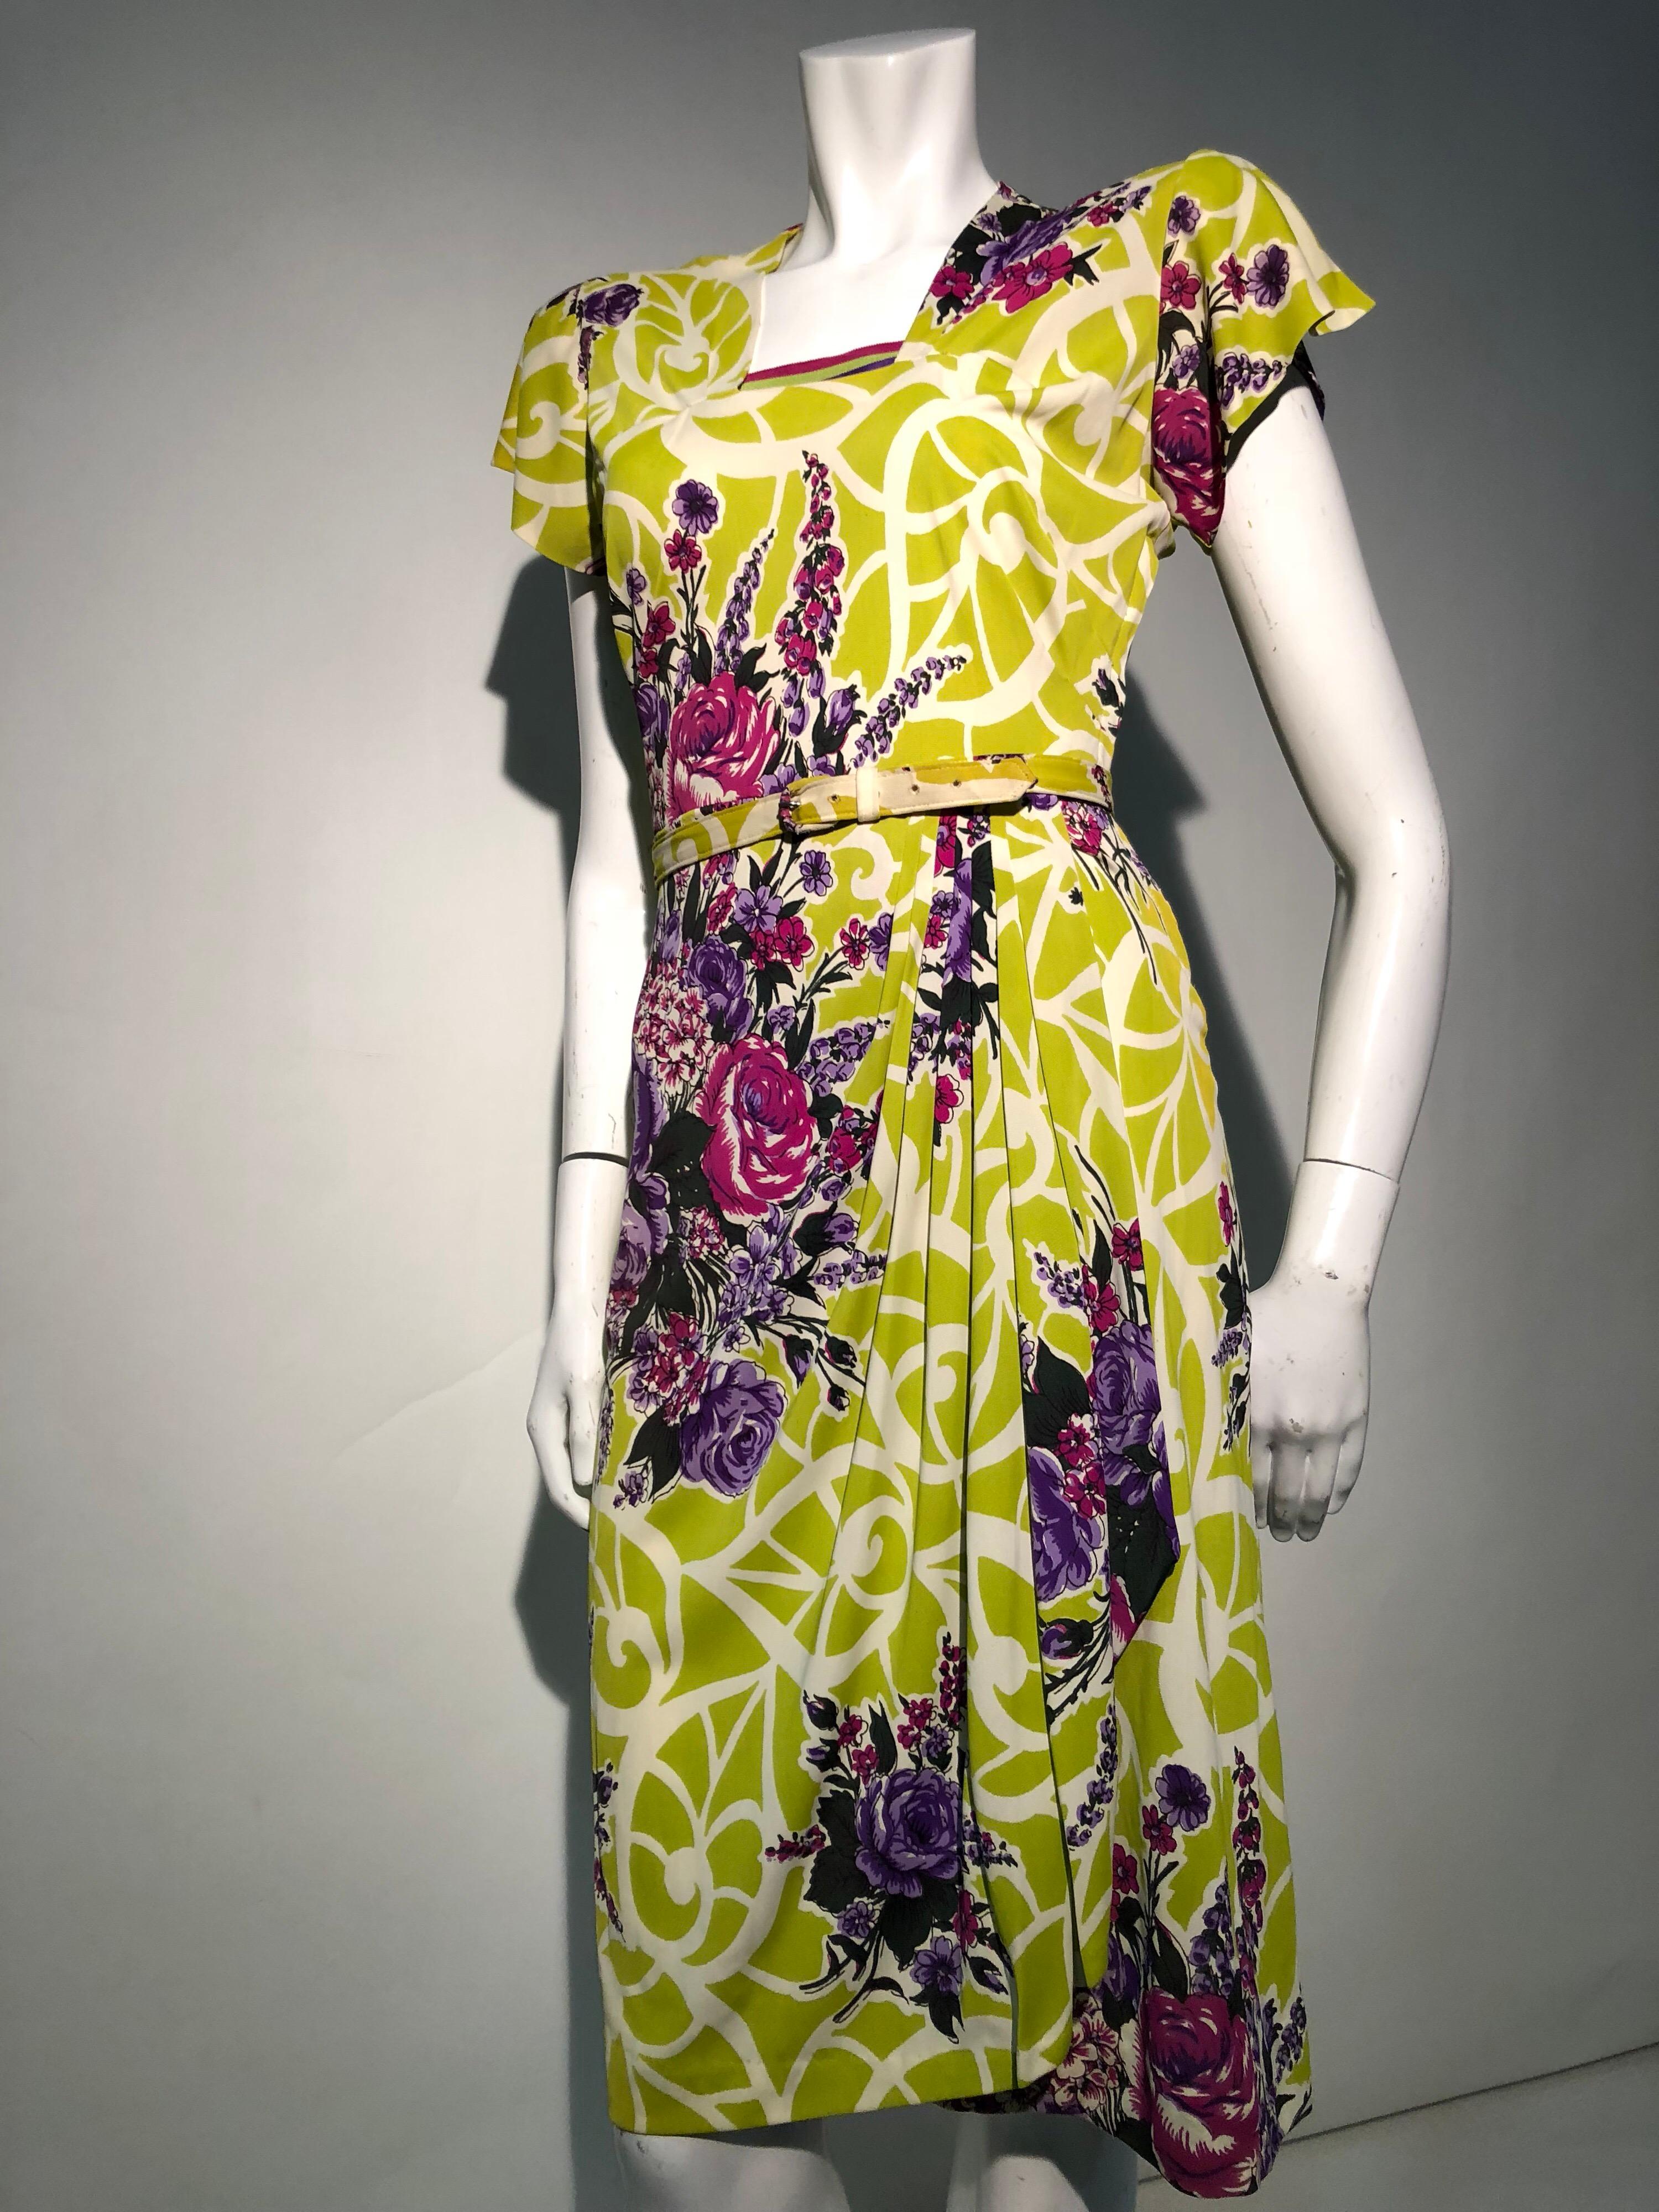 Incredible 1940s Nylon Jersey Swing Dress In A Spectacular Chartreuse and Floral In Excellent Condition For Sale In Gresham, OR